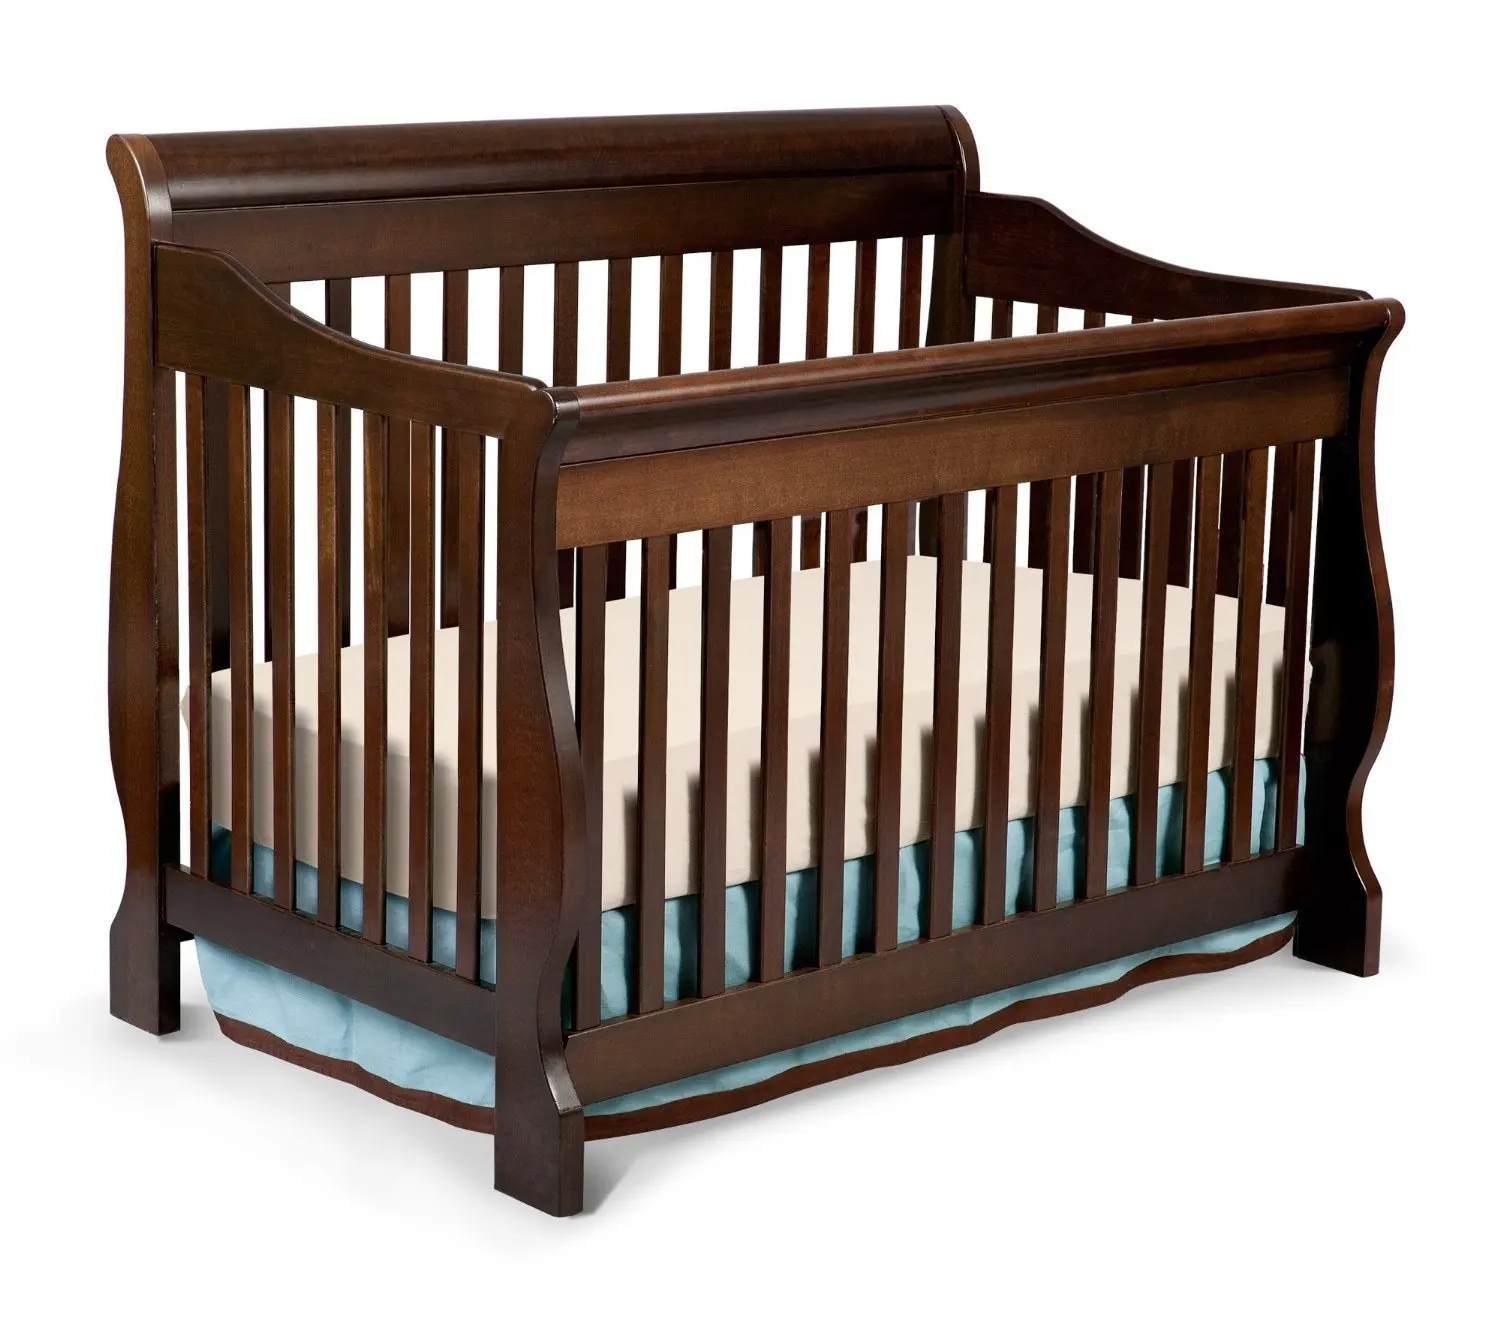 Cheap Baby Cribs Sets Furniture Find Baby Cribs Sets Furniture